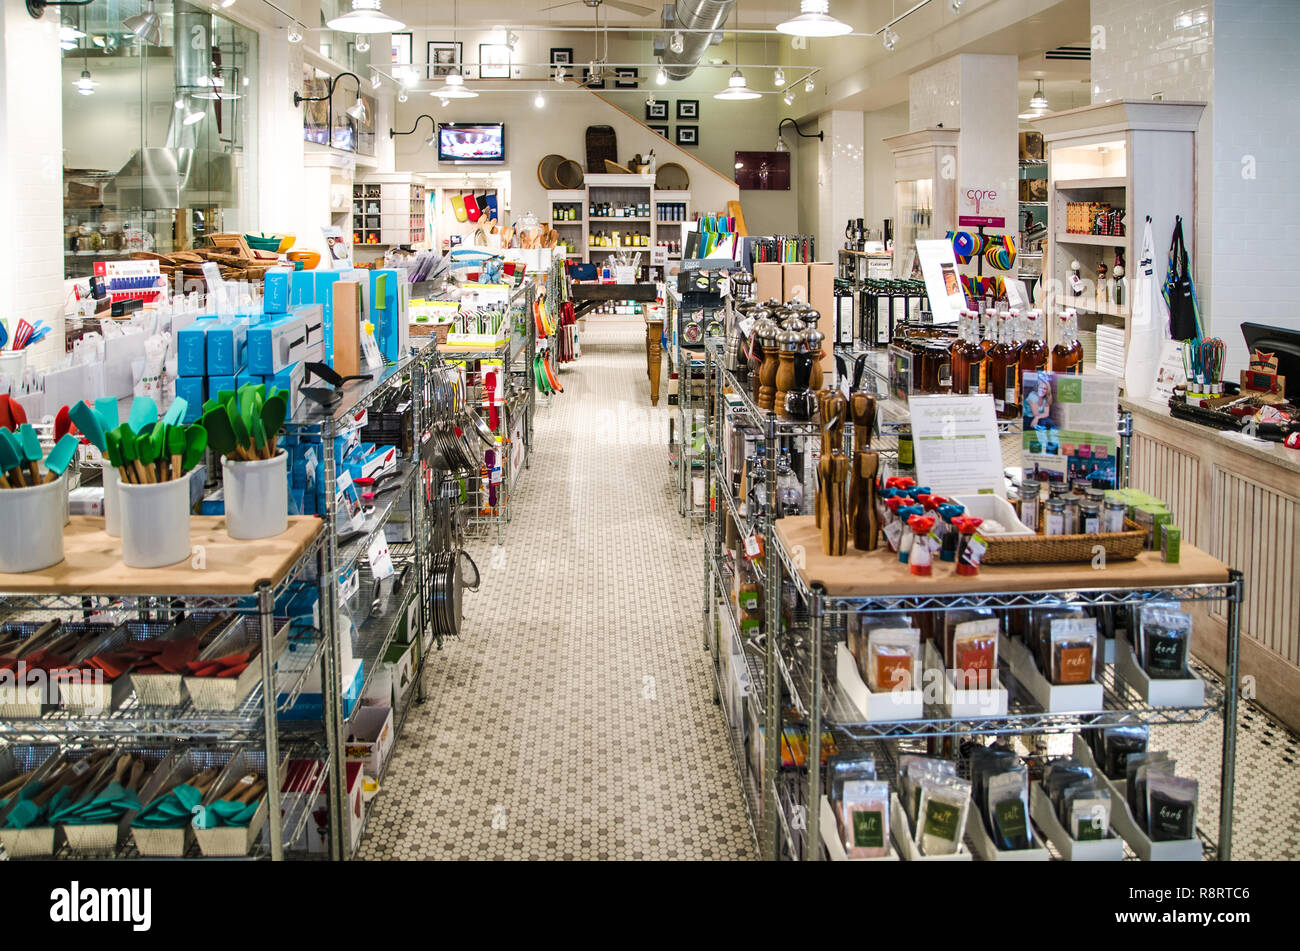 The Viking Range retail store in Greenwood, Mississippi offers a wide variety of kitchenware, along with cooking classes. Stock Photo